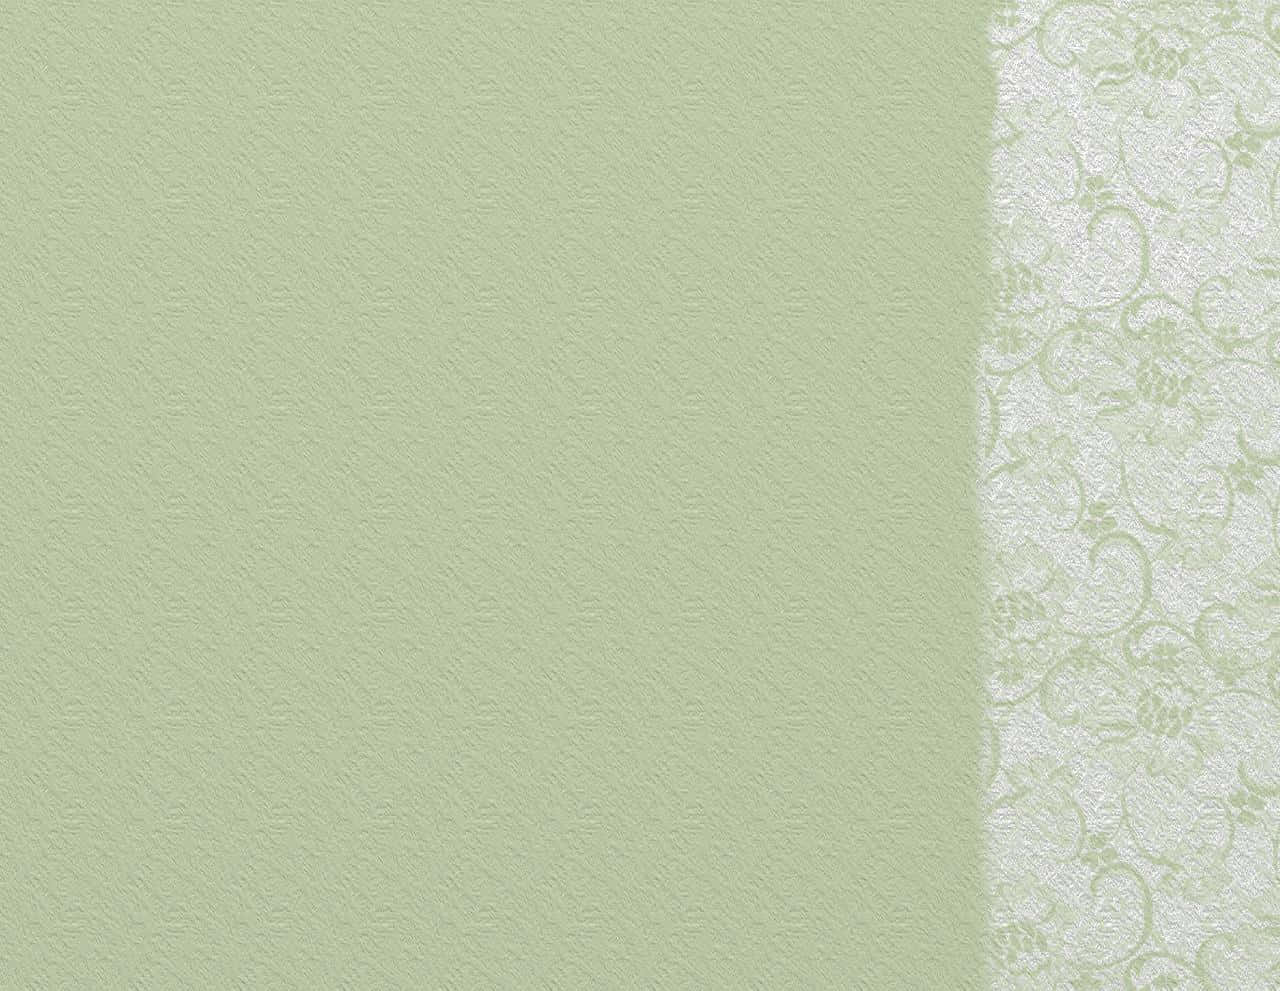 Let your creativity roam free with a sleek sage green laptop Wallpaper